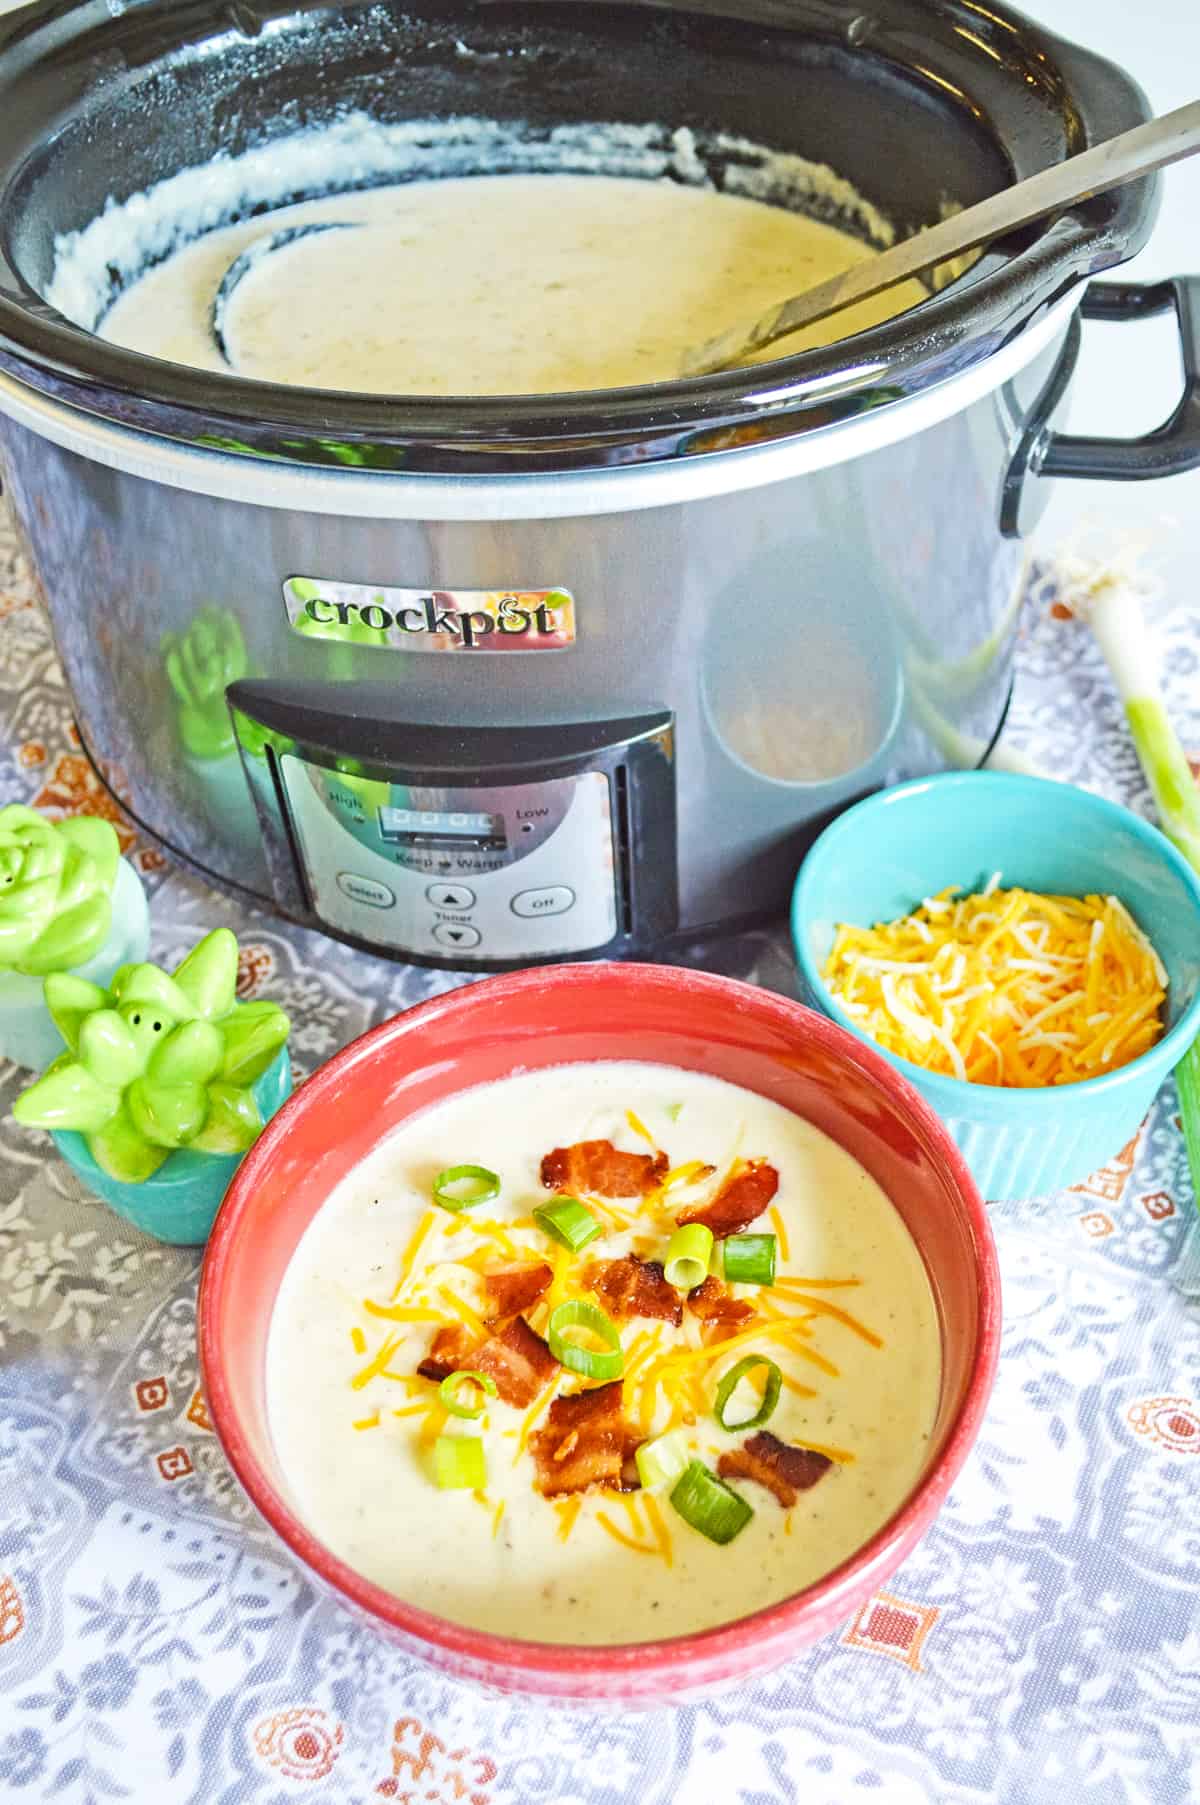 Crockpot full of baked potato soup with bowl of soup topped with scallions, cheese, and bacon next to it. To the side are a bowl of shredded cheese and salt and pepper shakers